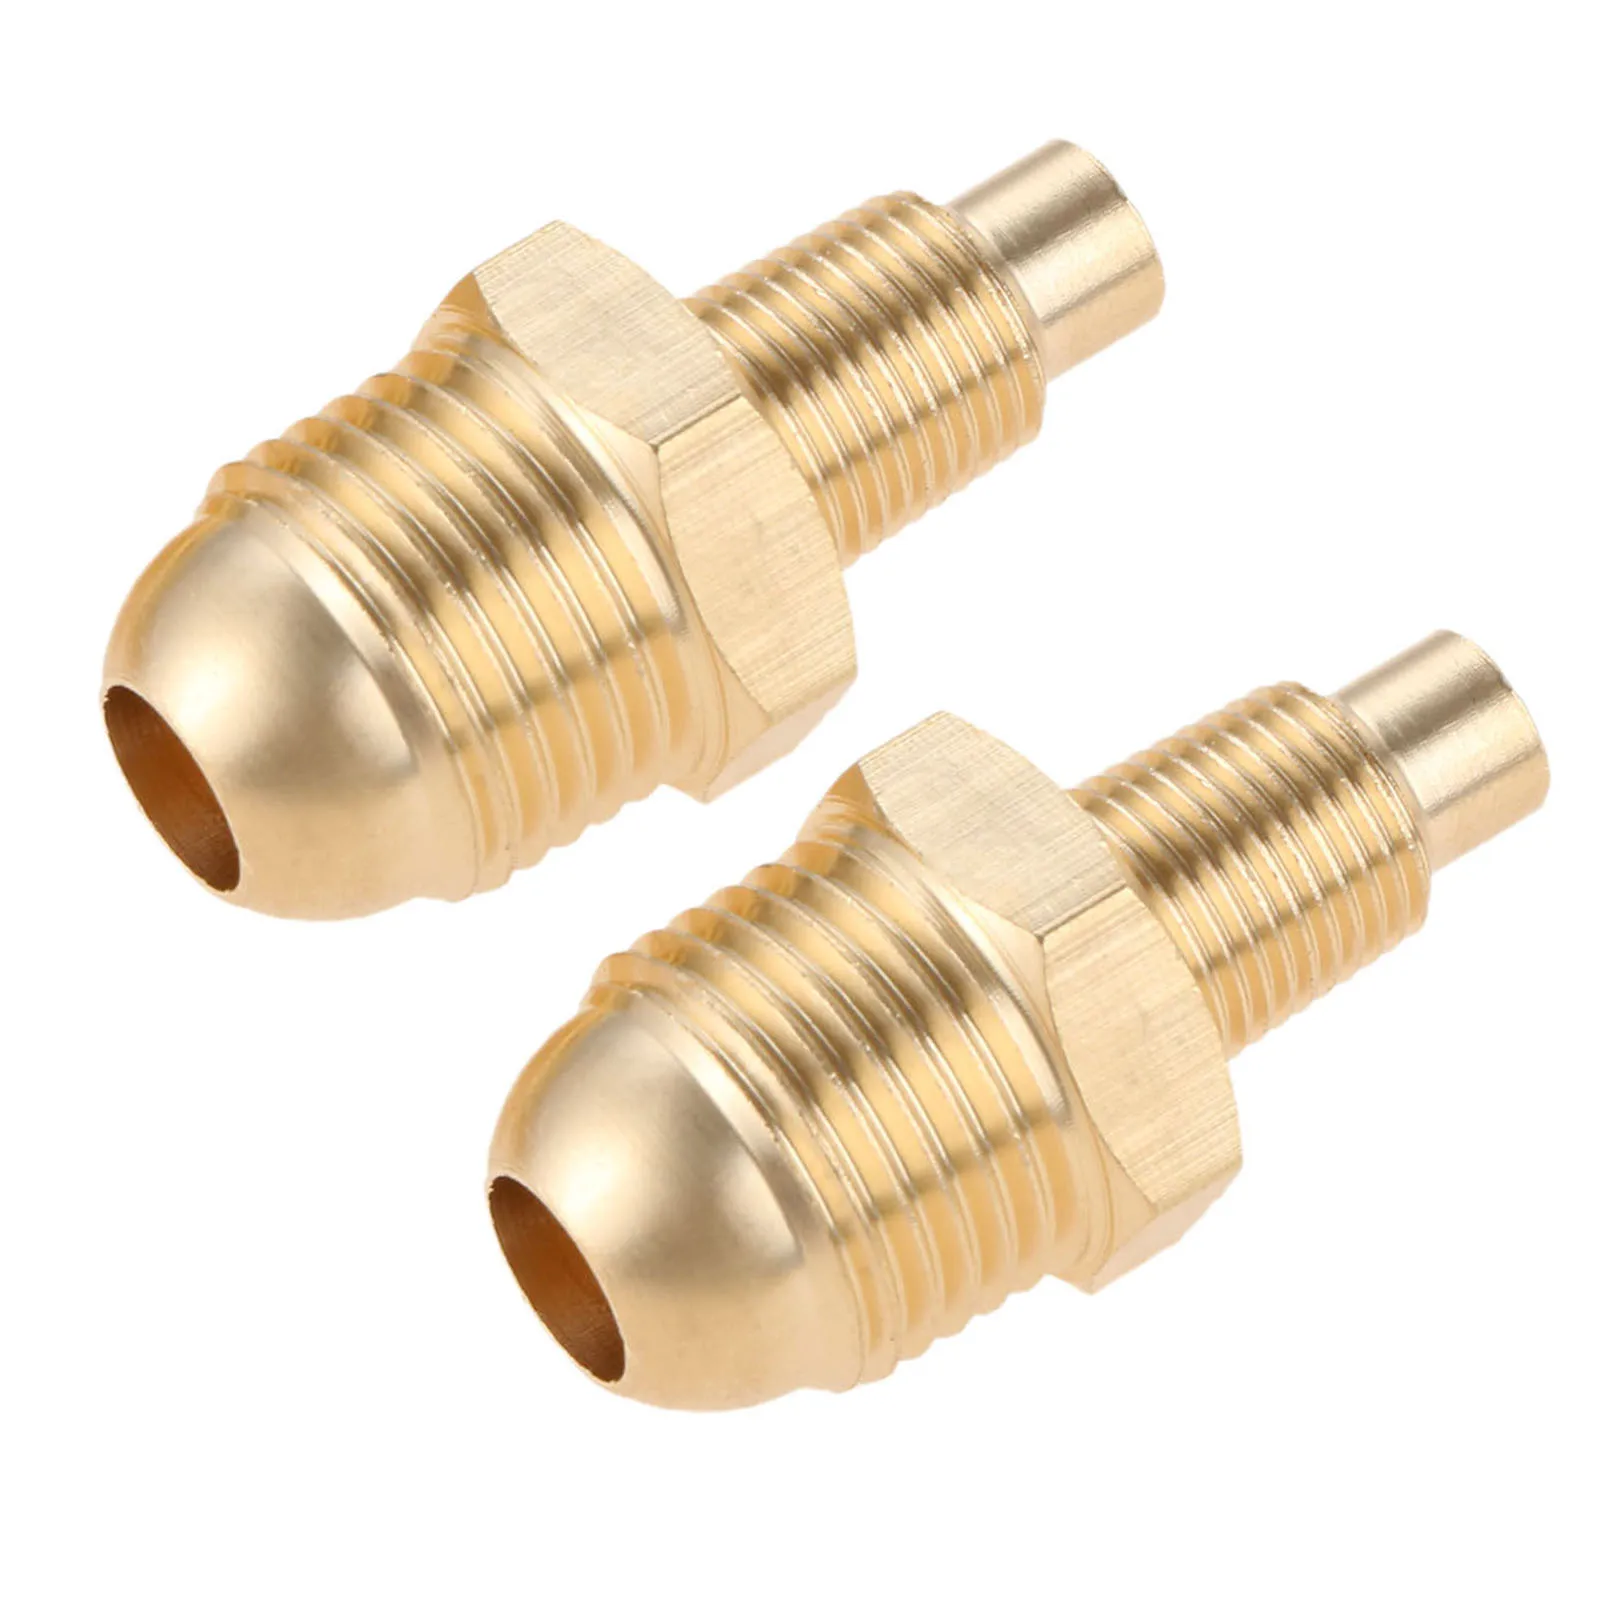 

2Pcs Brass Propane Orifice Connector Tube Fitting for Casting Cooking Stove Grill Turkey Pot Cooker 3/8" Flare x 1/8" Mnpt